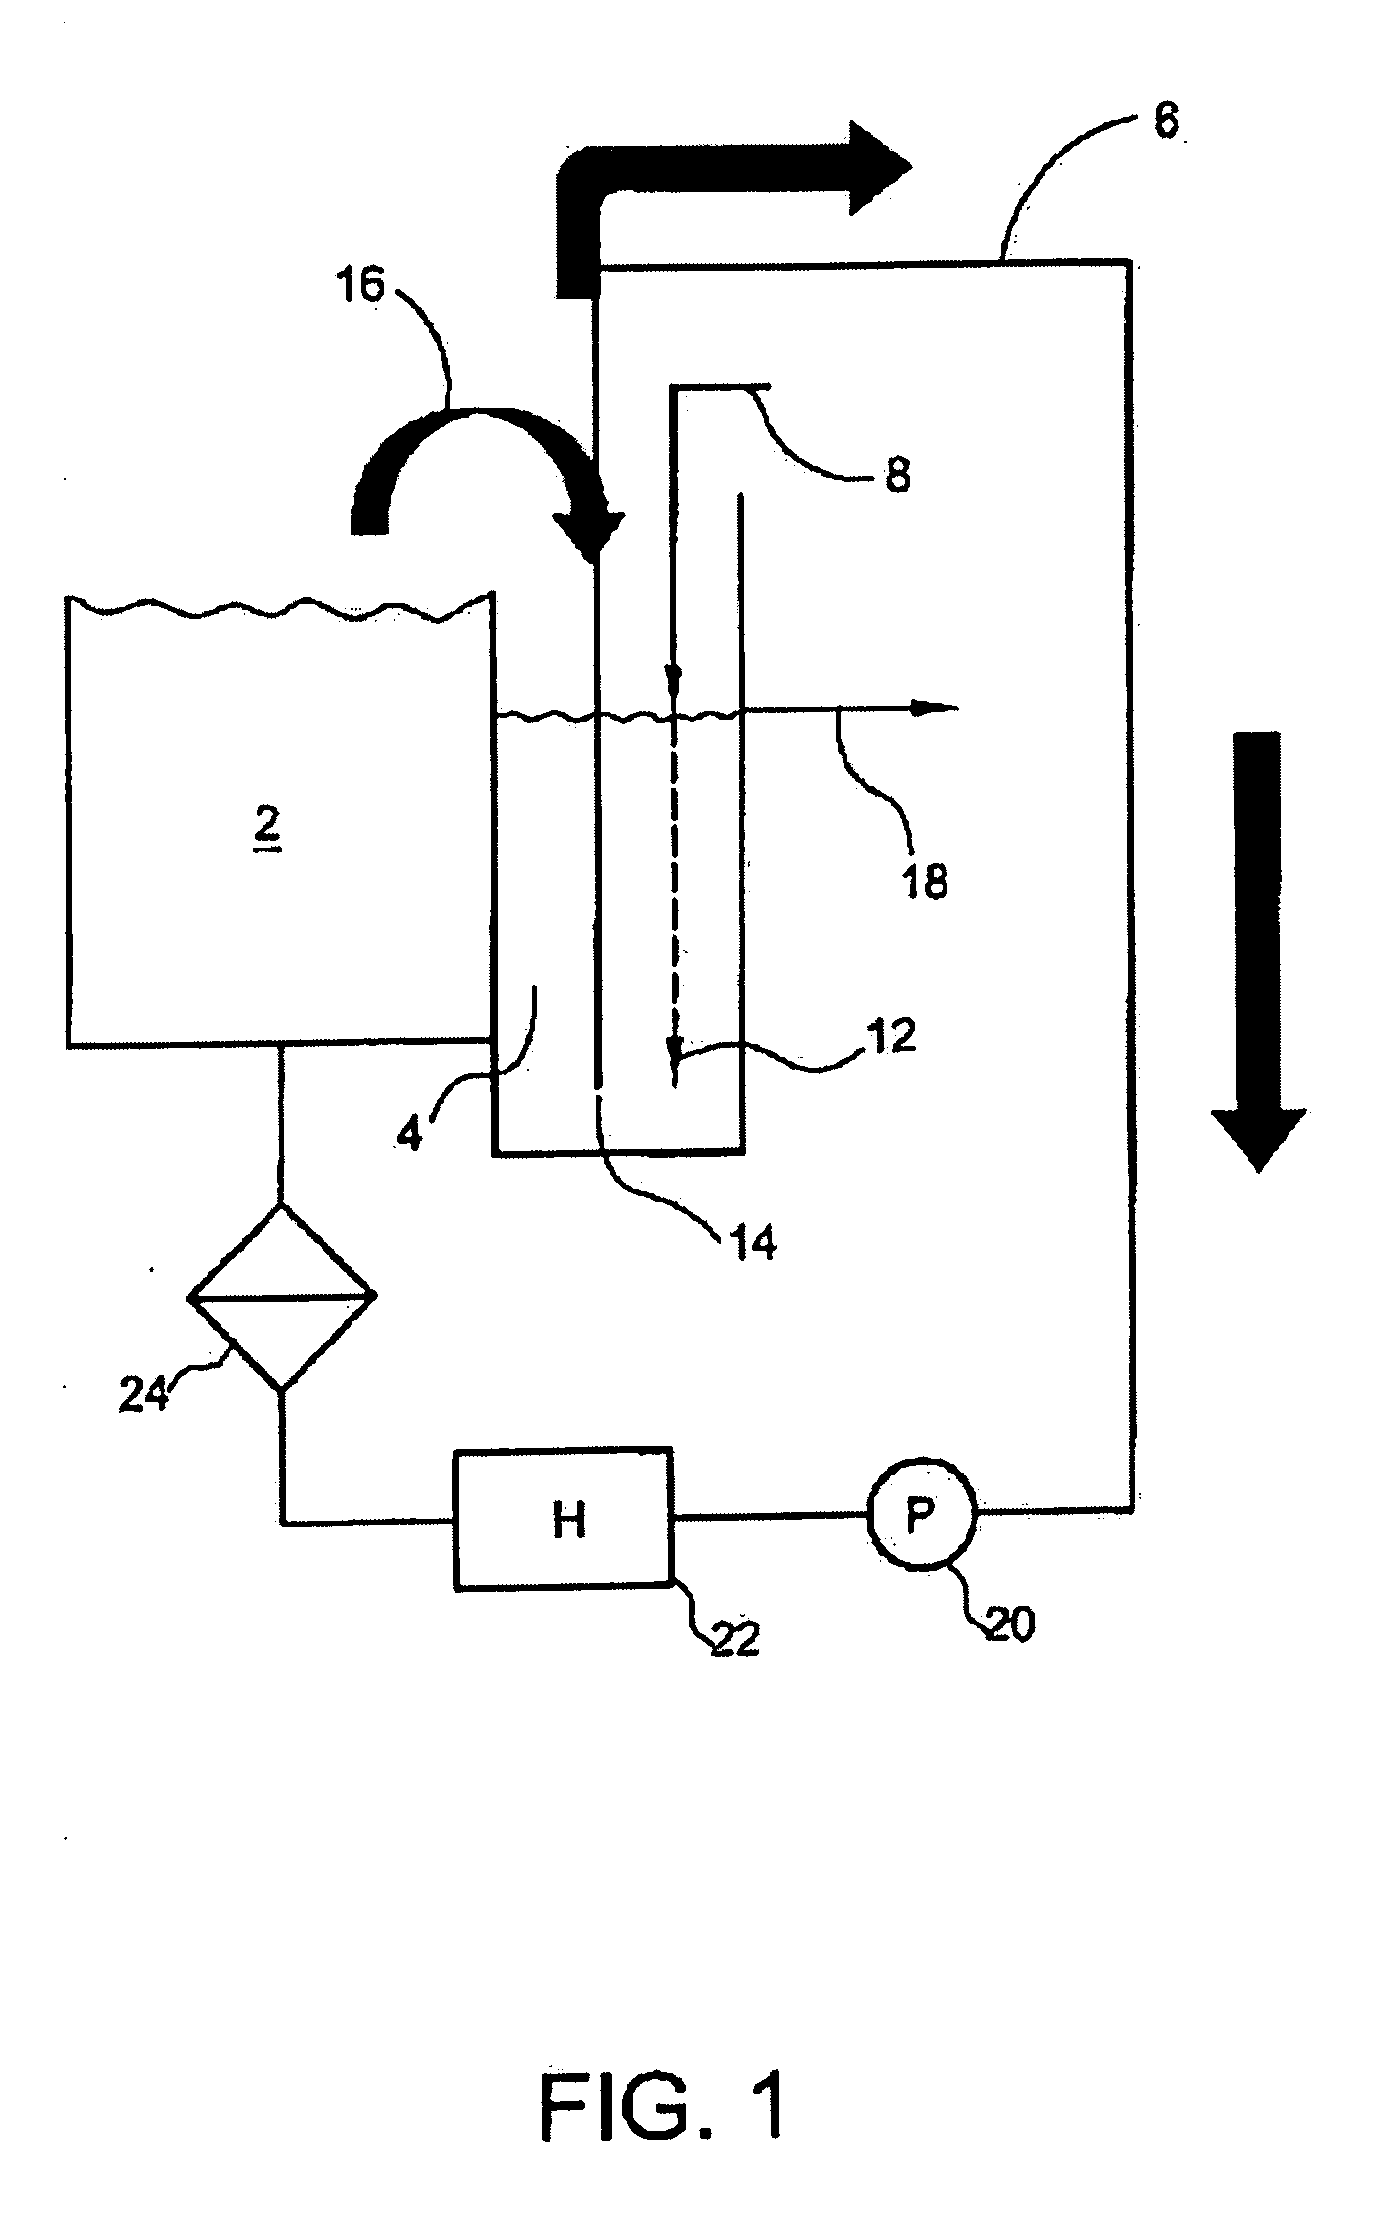 Method and system for improving wet chemical bath process stability and productivity in semiconductor manufacturing